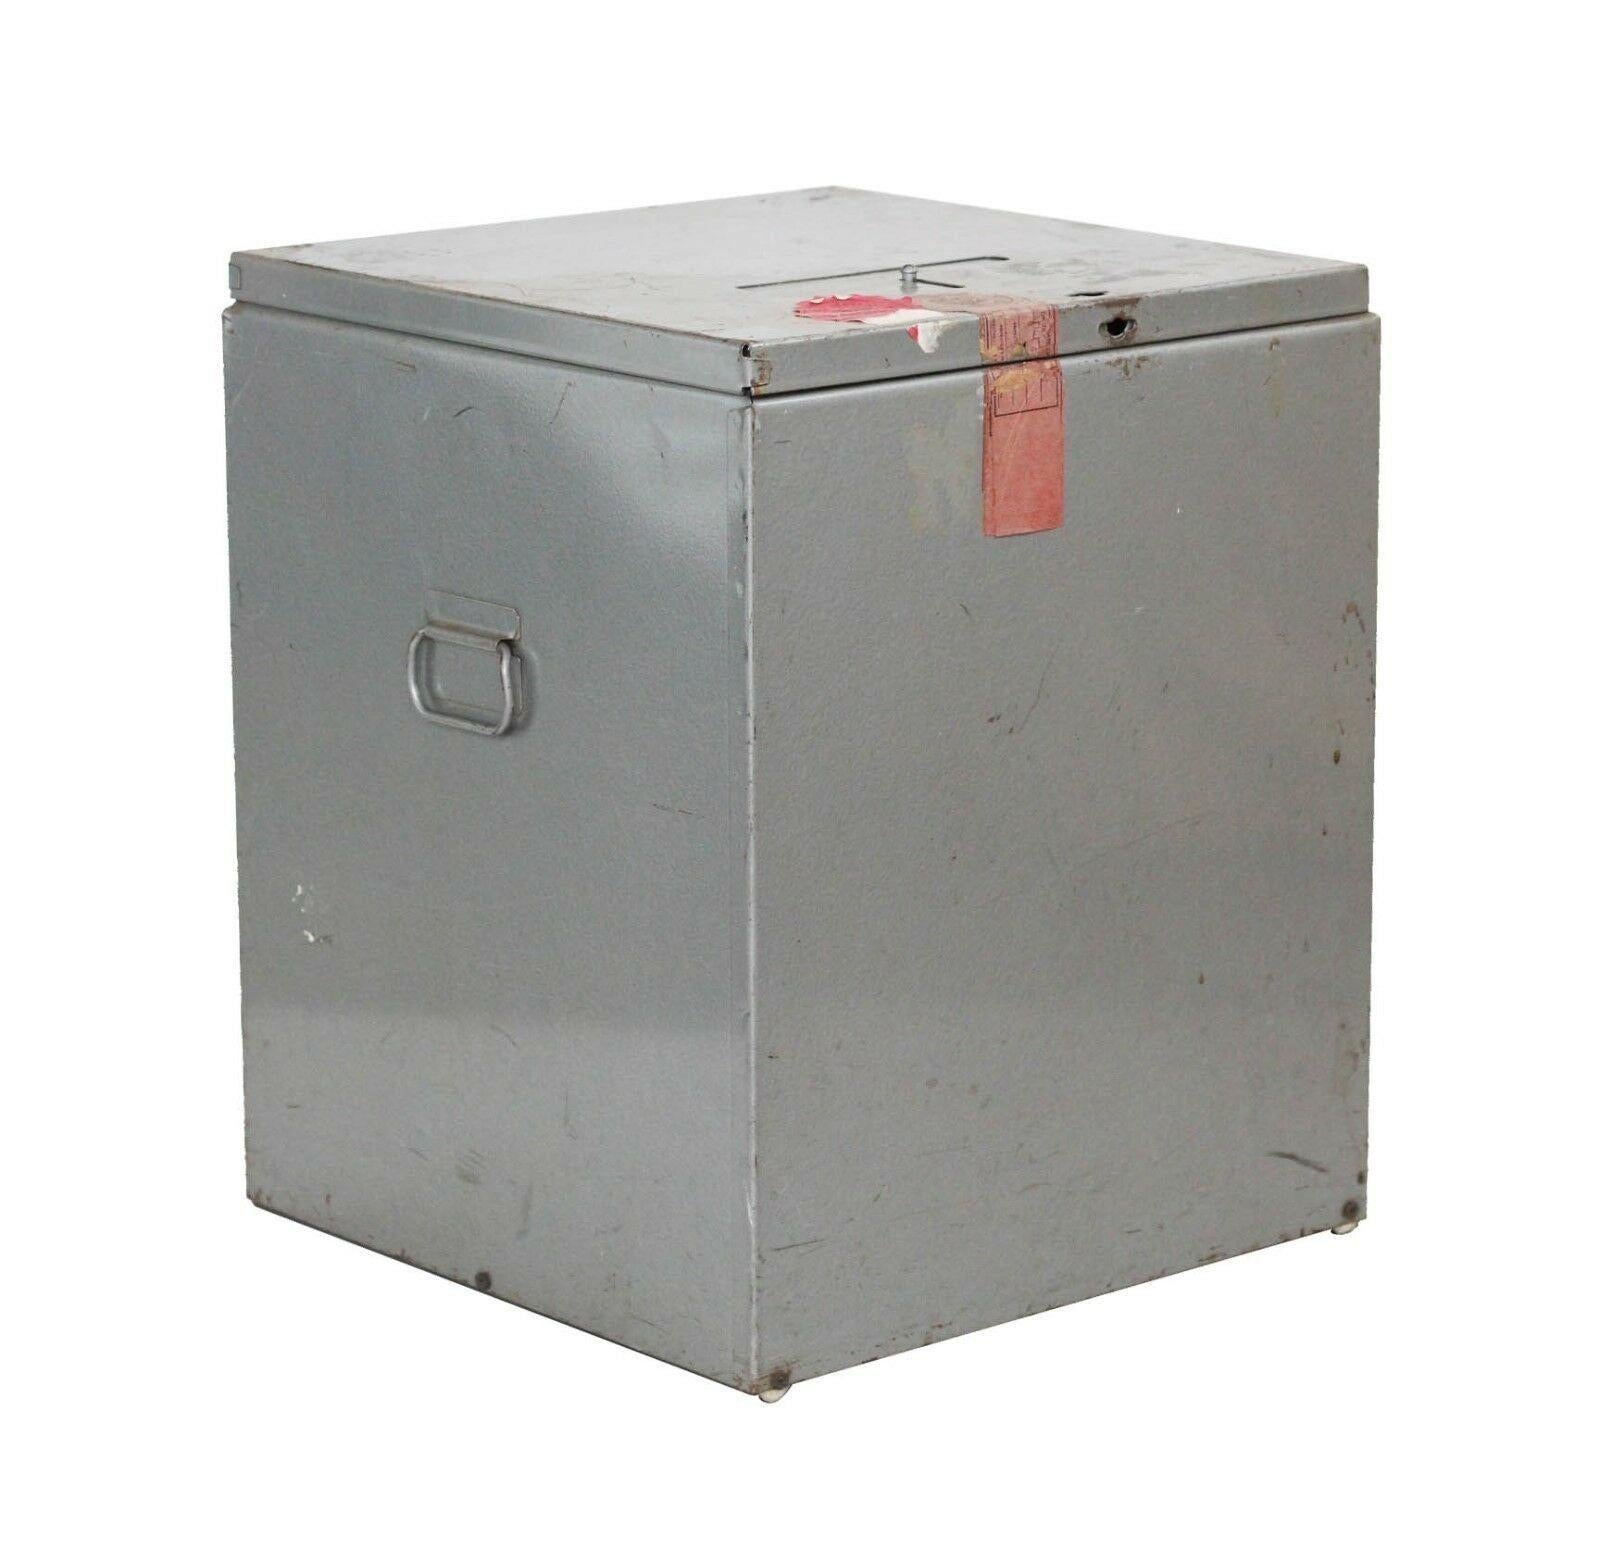 USA, 1990s
Authentic decommissioned ballot box from Kent County, Michigan. Steel construction- industrial grey finish. Retains various original seals and stamps. The slot can be opened or closed; there is a position for the box to be sealed and